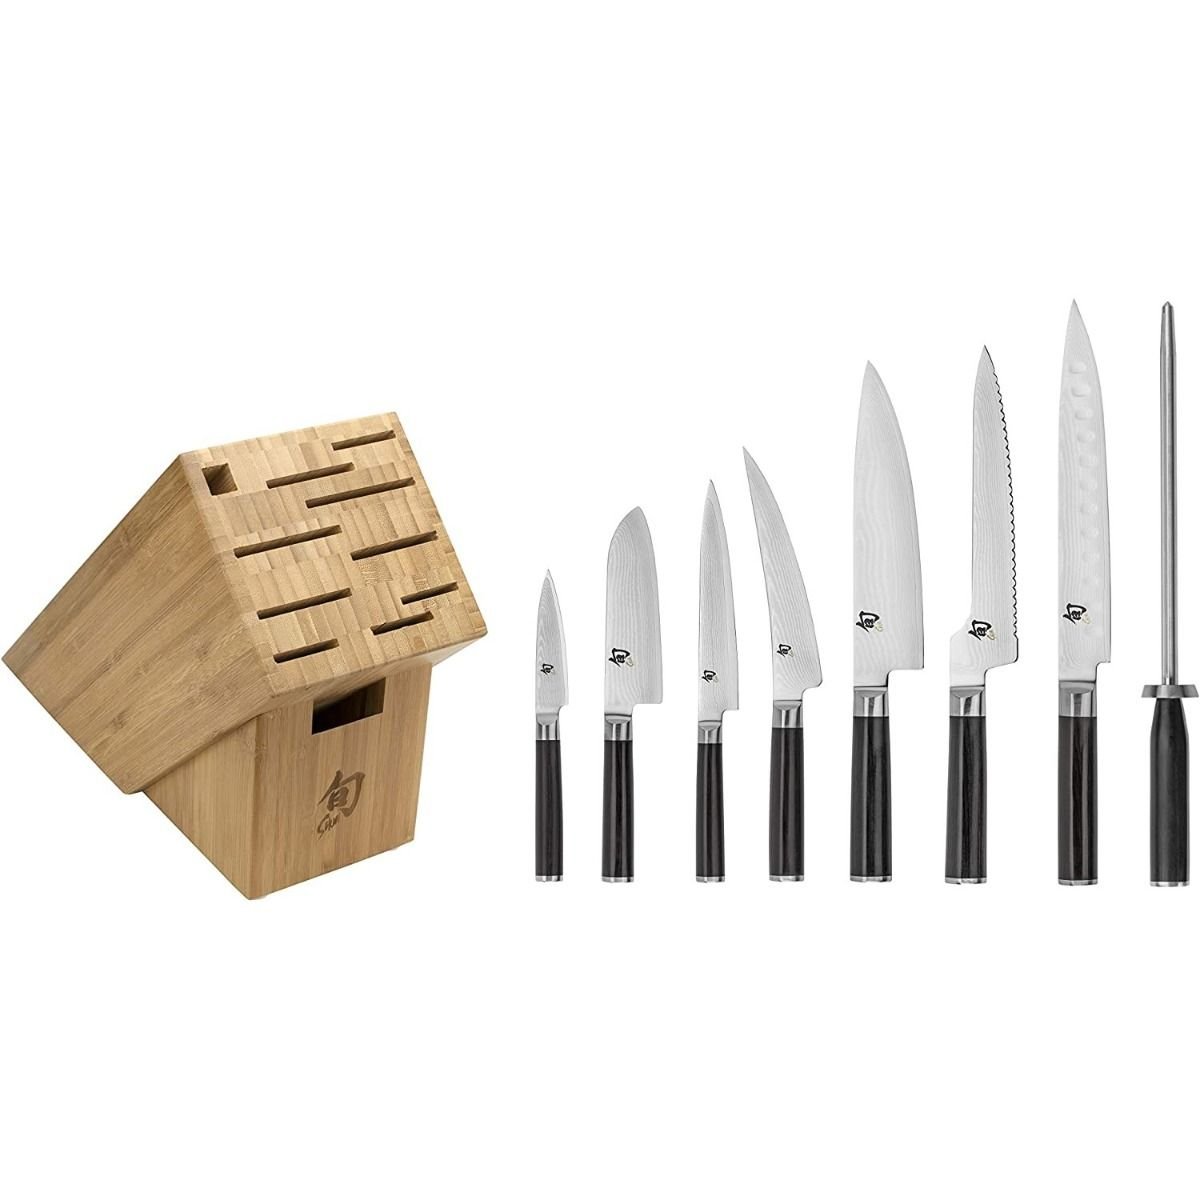 Best Professional Knife Sets for Chefs for Beginners Damascus Steel Shun USA